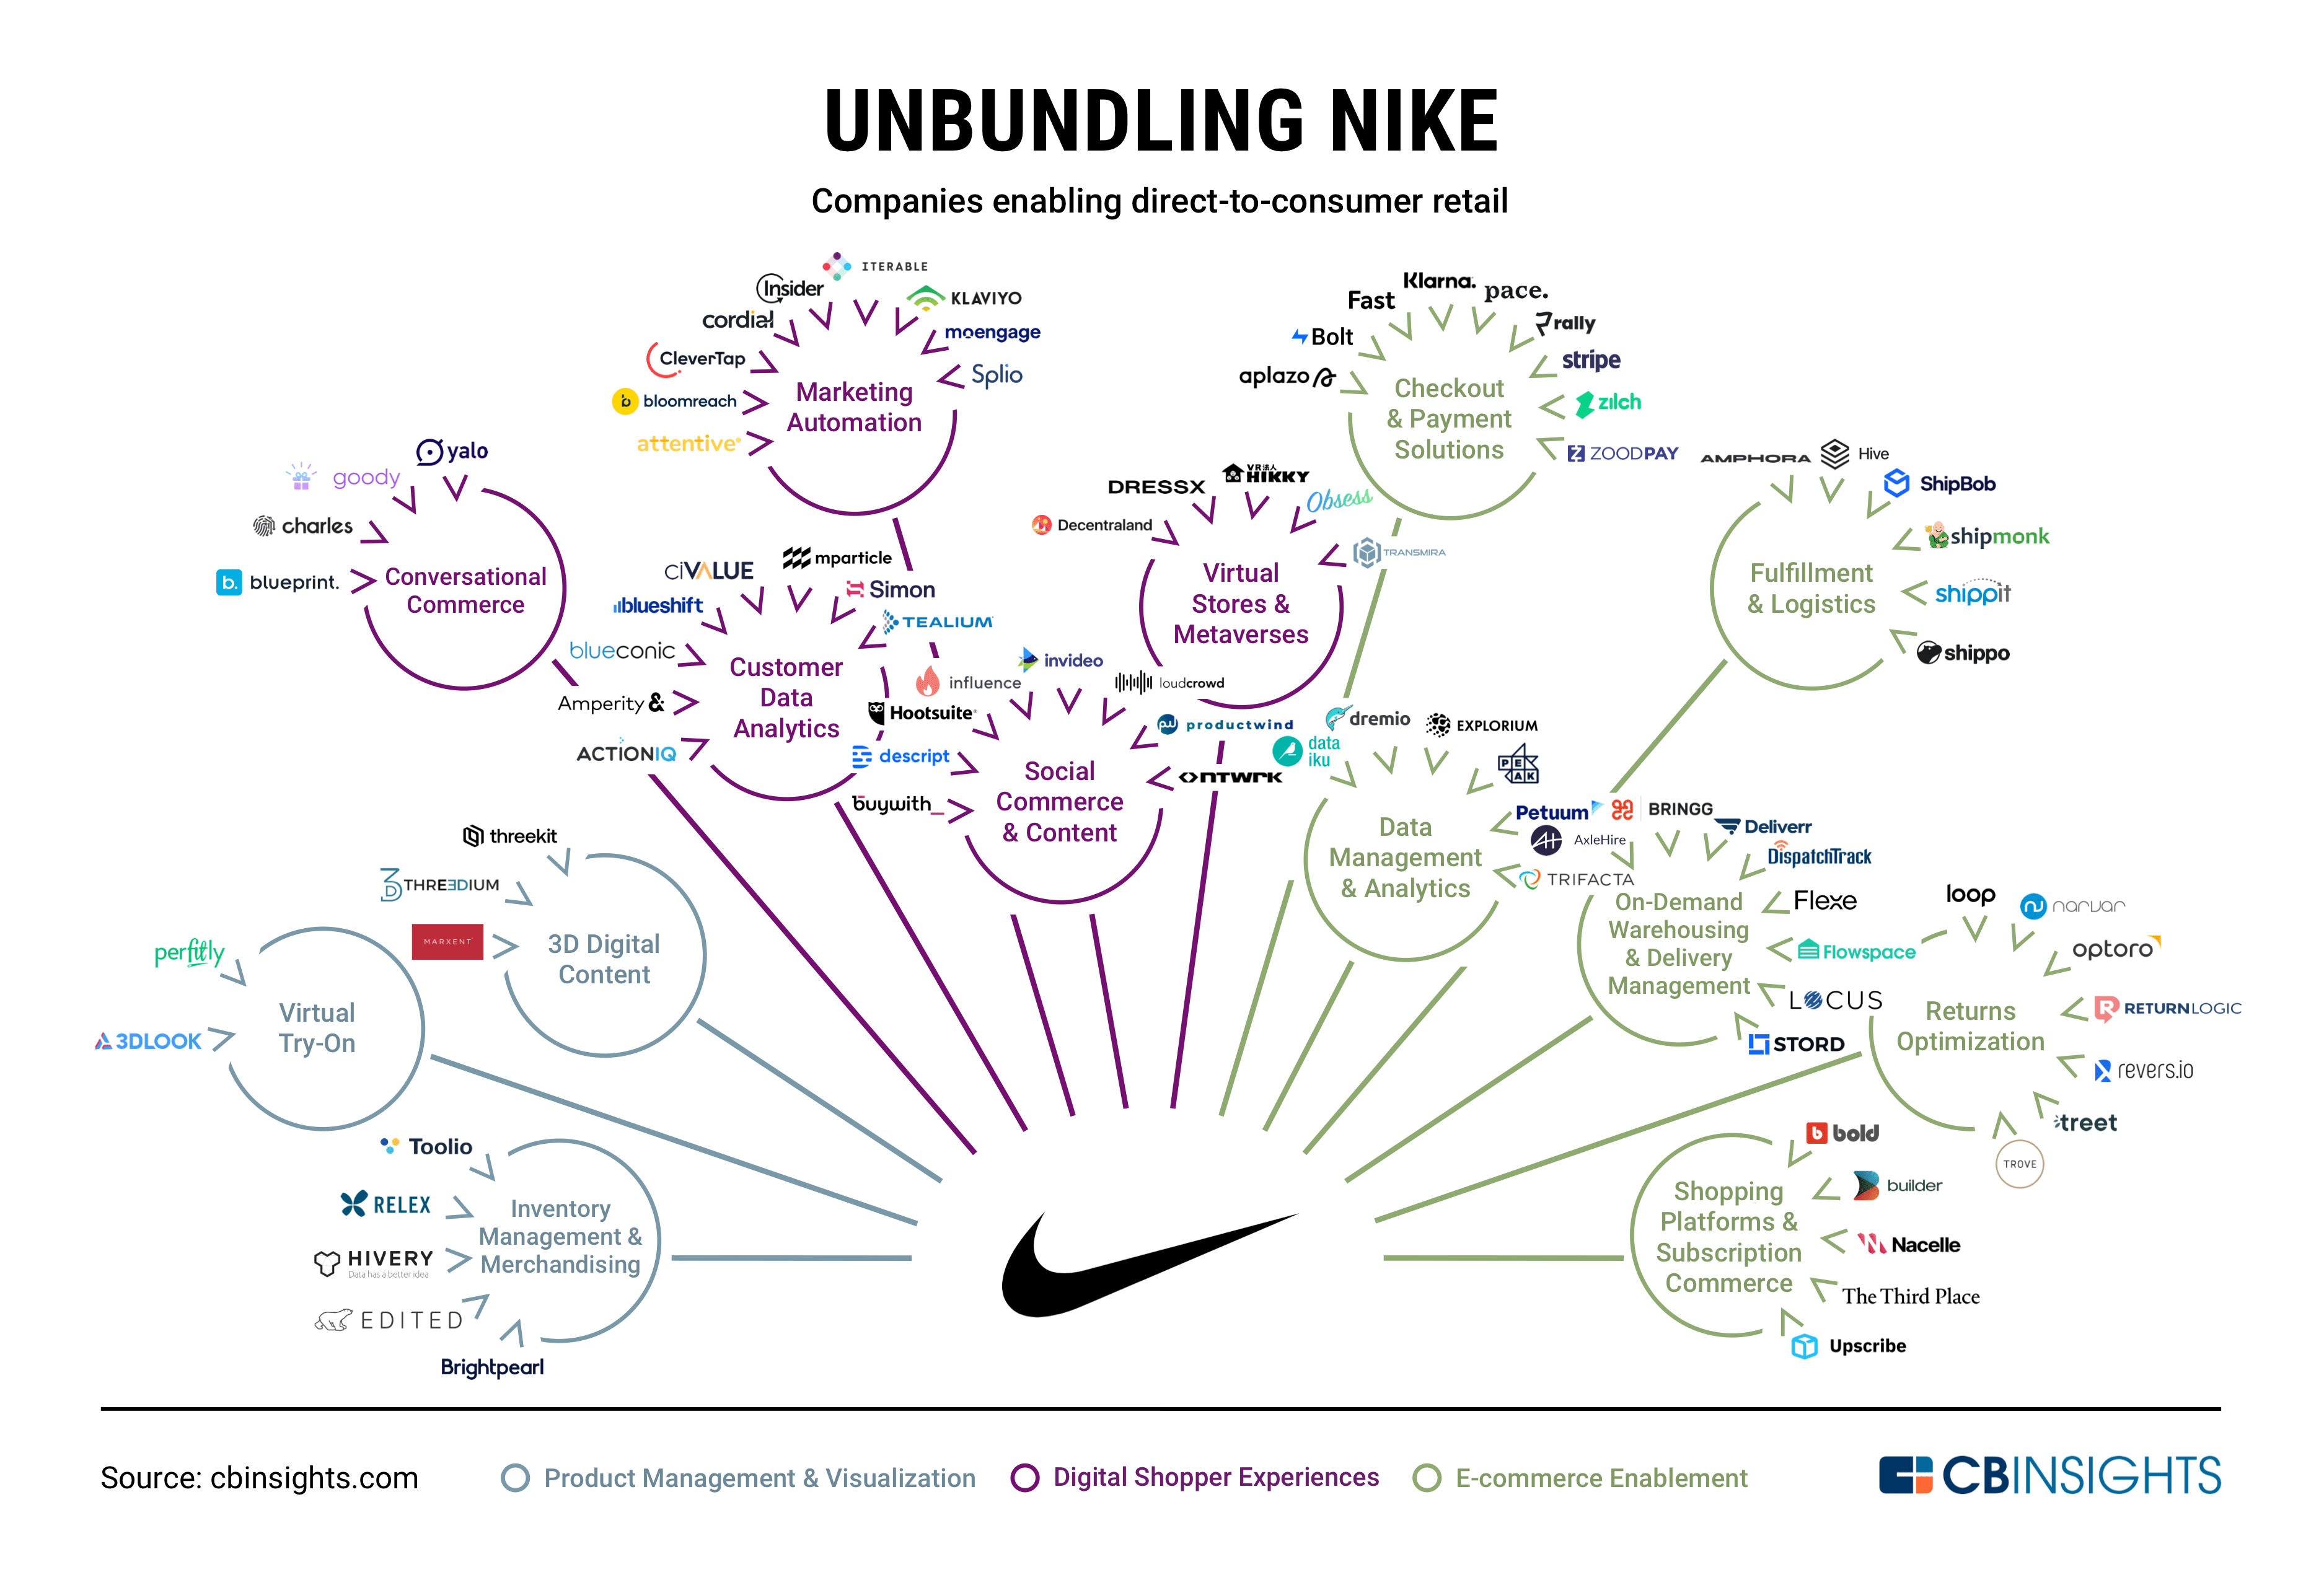 estimular Respectivamente Deshonestidad Unbundling Nike: How Direct-To-Consumer Retail Is Being Disrupted - CB  Insights Research